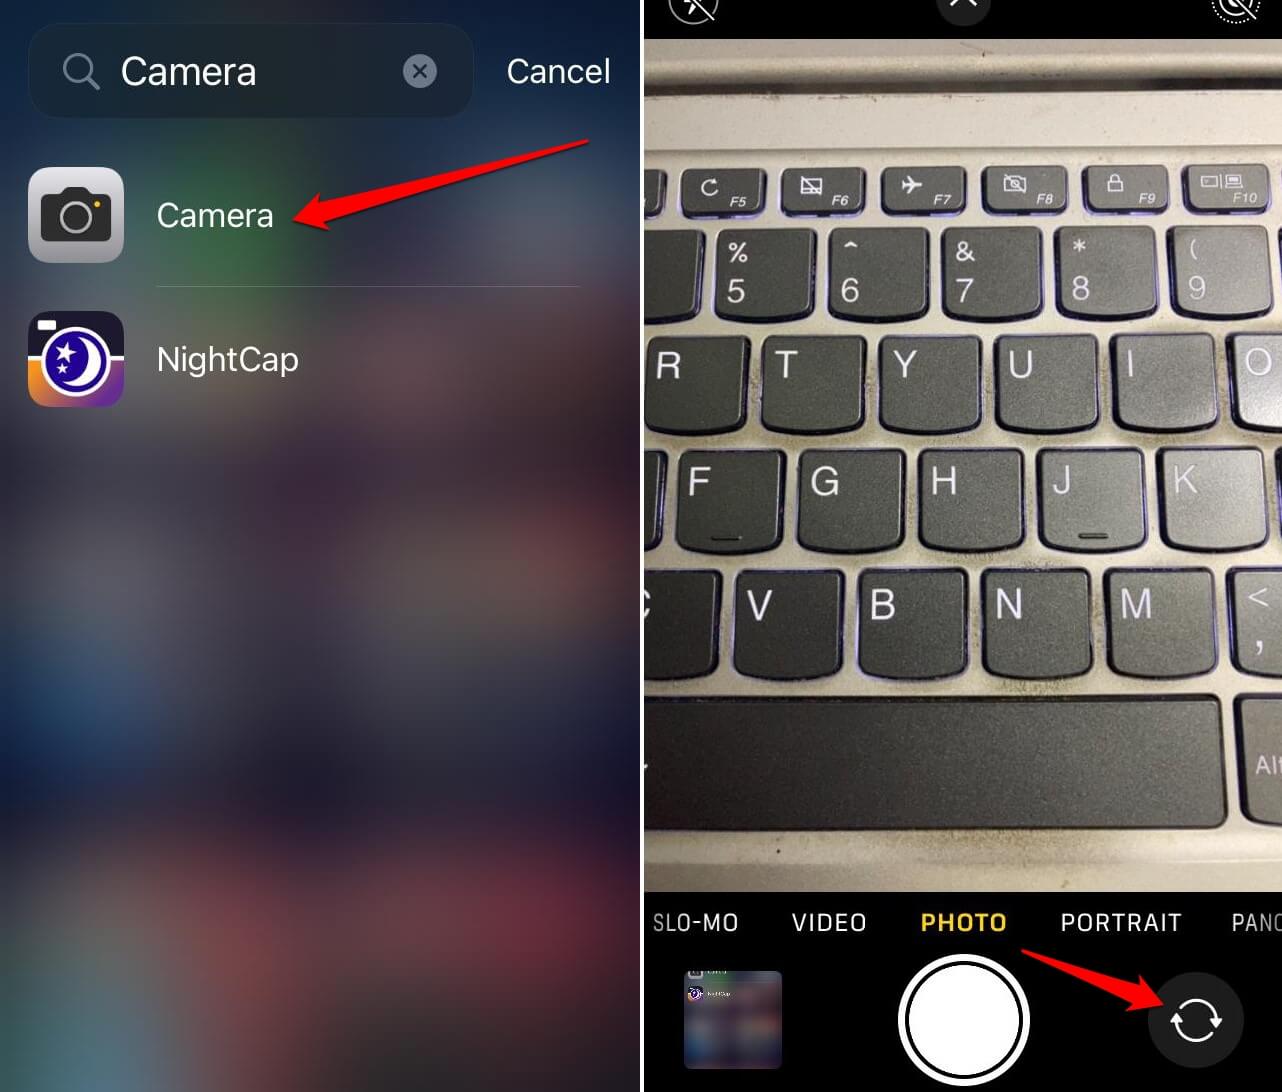 switch between iOS camera modes